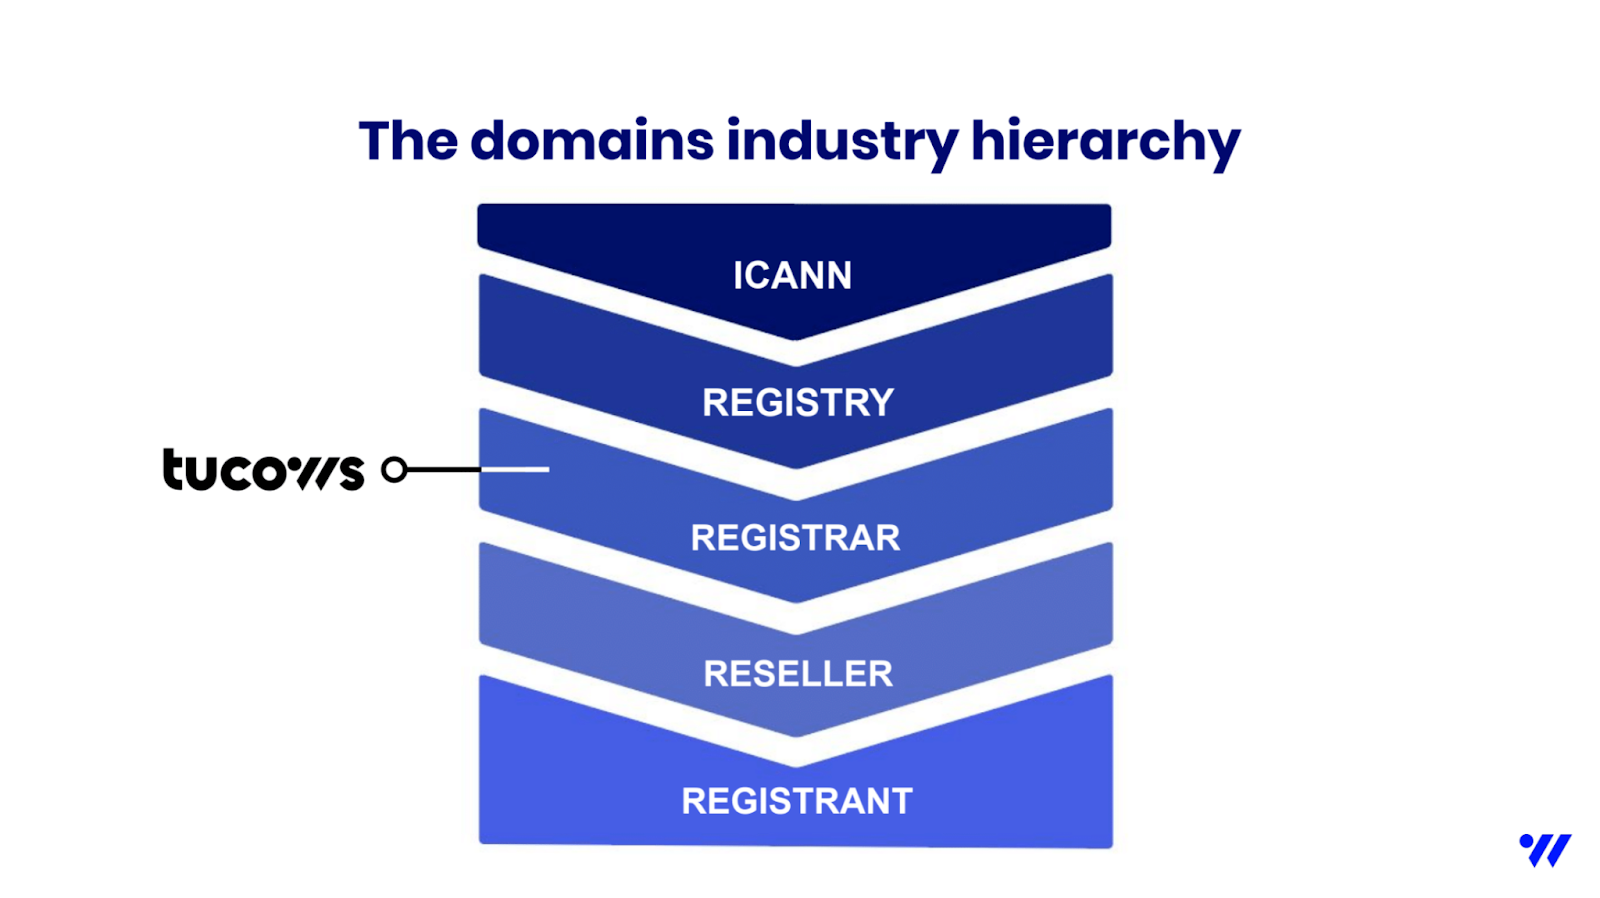 The domains industry hierarchy.